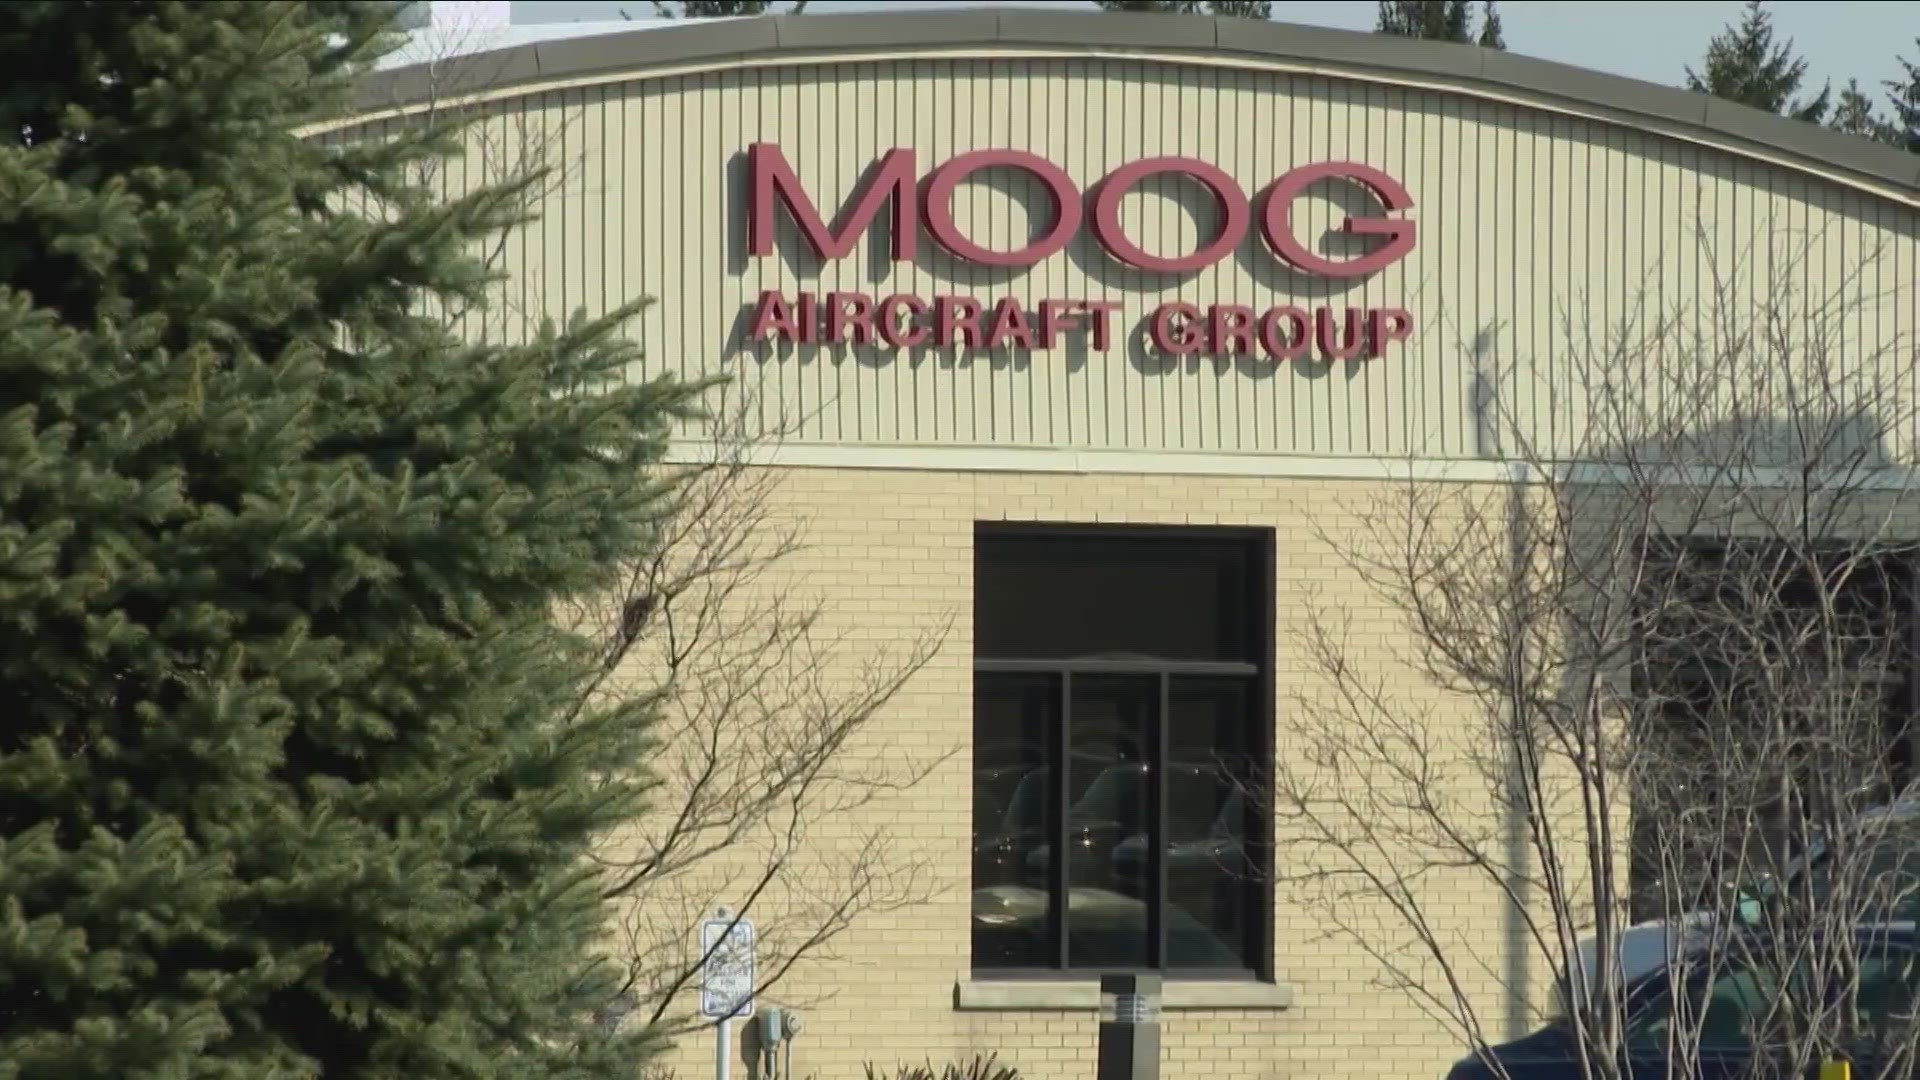 Moog is expected to receive another round of tax breaks from the Erie County IDA